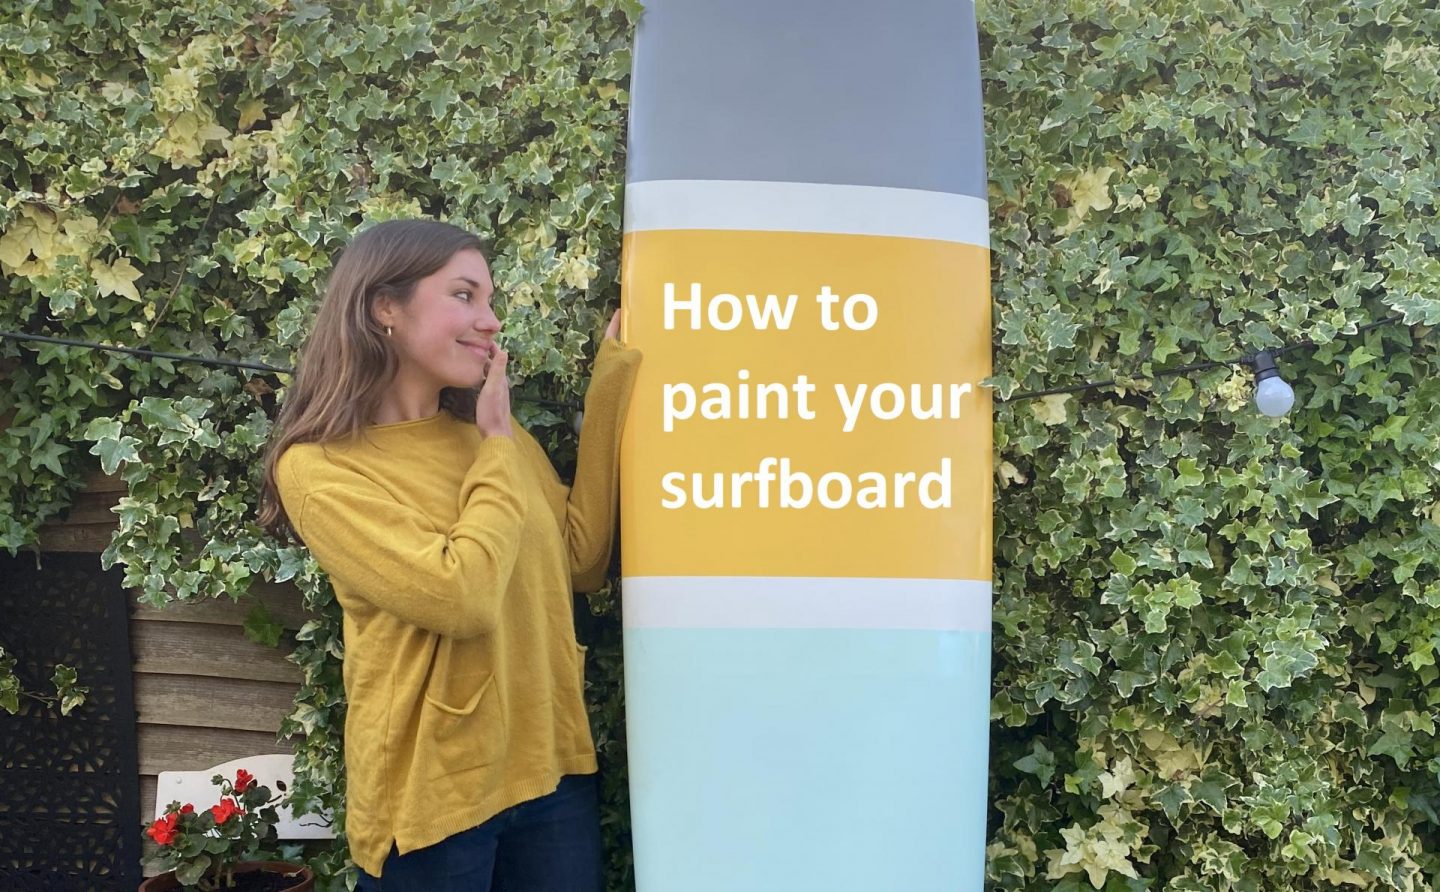 Video: How to paint your surfboard | Custom spray paint tutorial